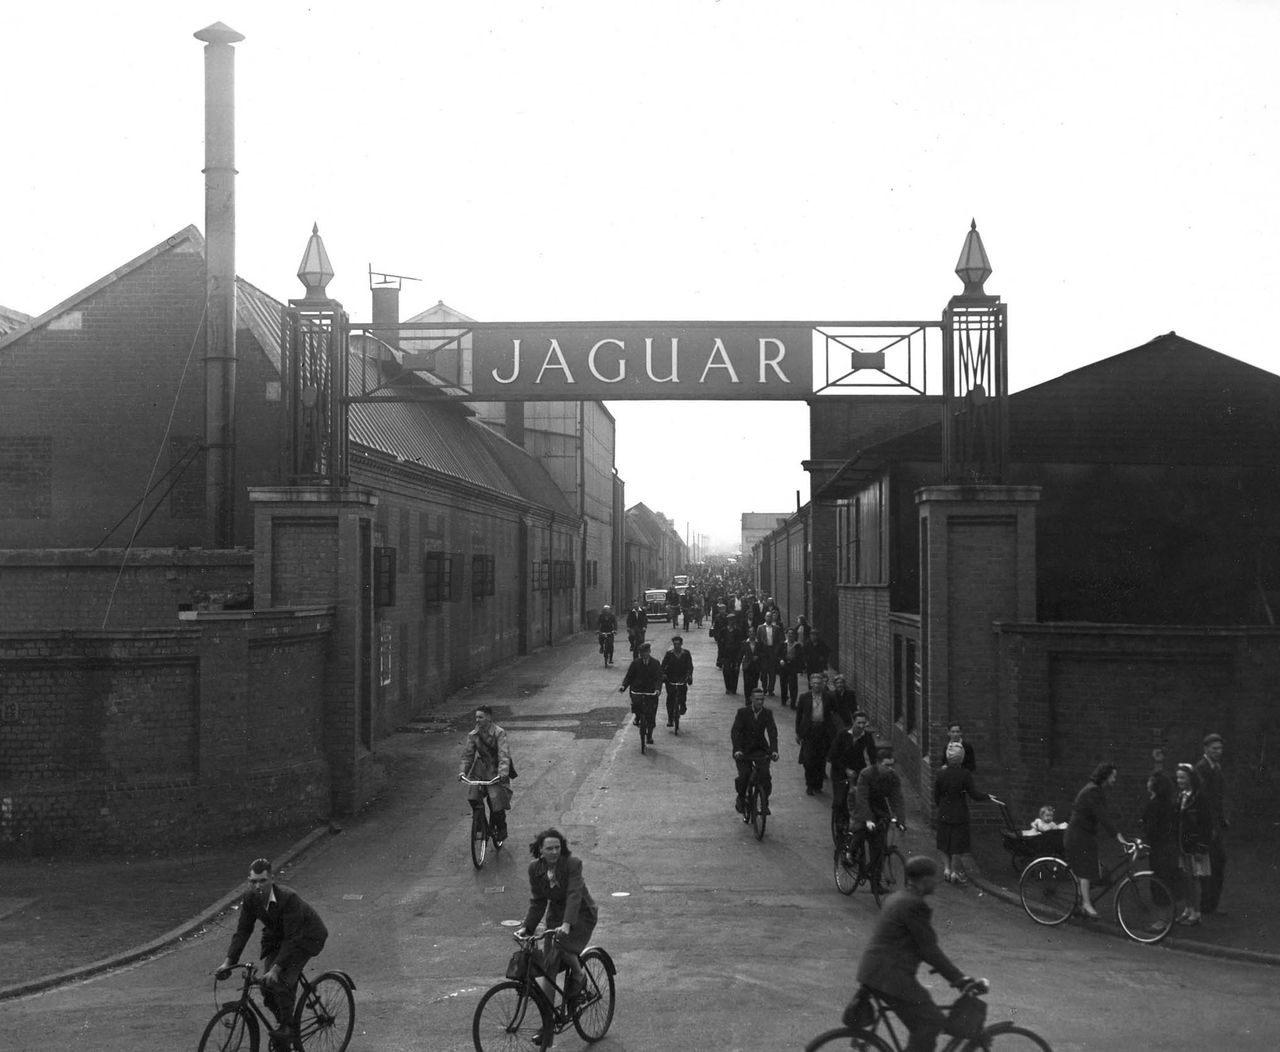 Arbeiders verlaten de Jaguar-fabriek in het Britse Coventry, rond 1936. Foto Bloomberg Workers exit the Jaguar manufacturing facility in Coventry, England in this circa 1936 company photograph. Now that Ford Motor Co. has slashed overhead by deciding to close a Jaguar factory in England, an even more daunting task lies ahead: figuring out what future Jaguars will look like. Source: Wieck/Via Bloomberg News.